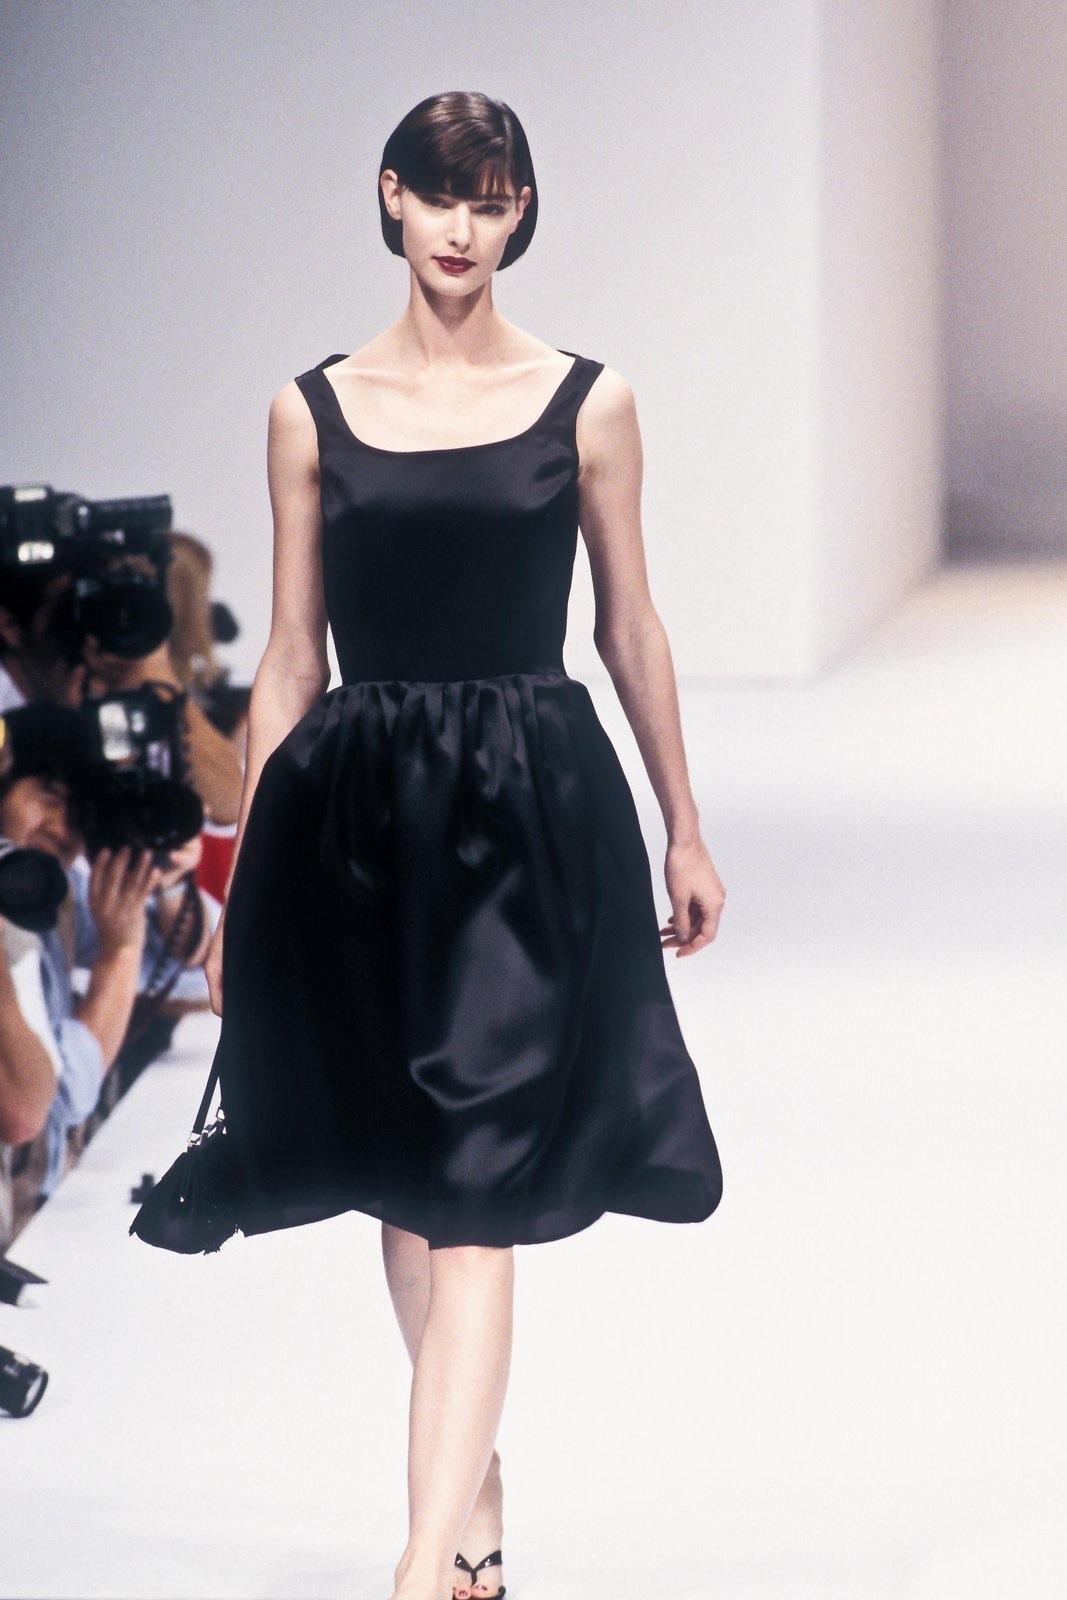 This black silk balloon-style skirt made its debut in Tom Ford's inaugural collection at Gucci, showcased in the Spring/Summer 1995 lineup. Crafted from a luxurious satin fabric, the skirt boasts gentle pleating at the waist, gracefully